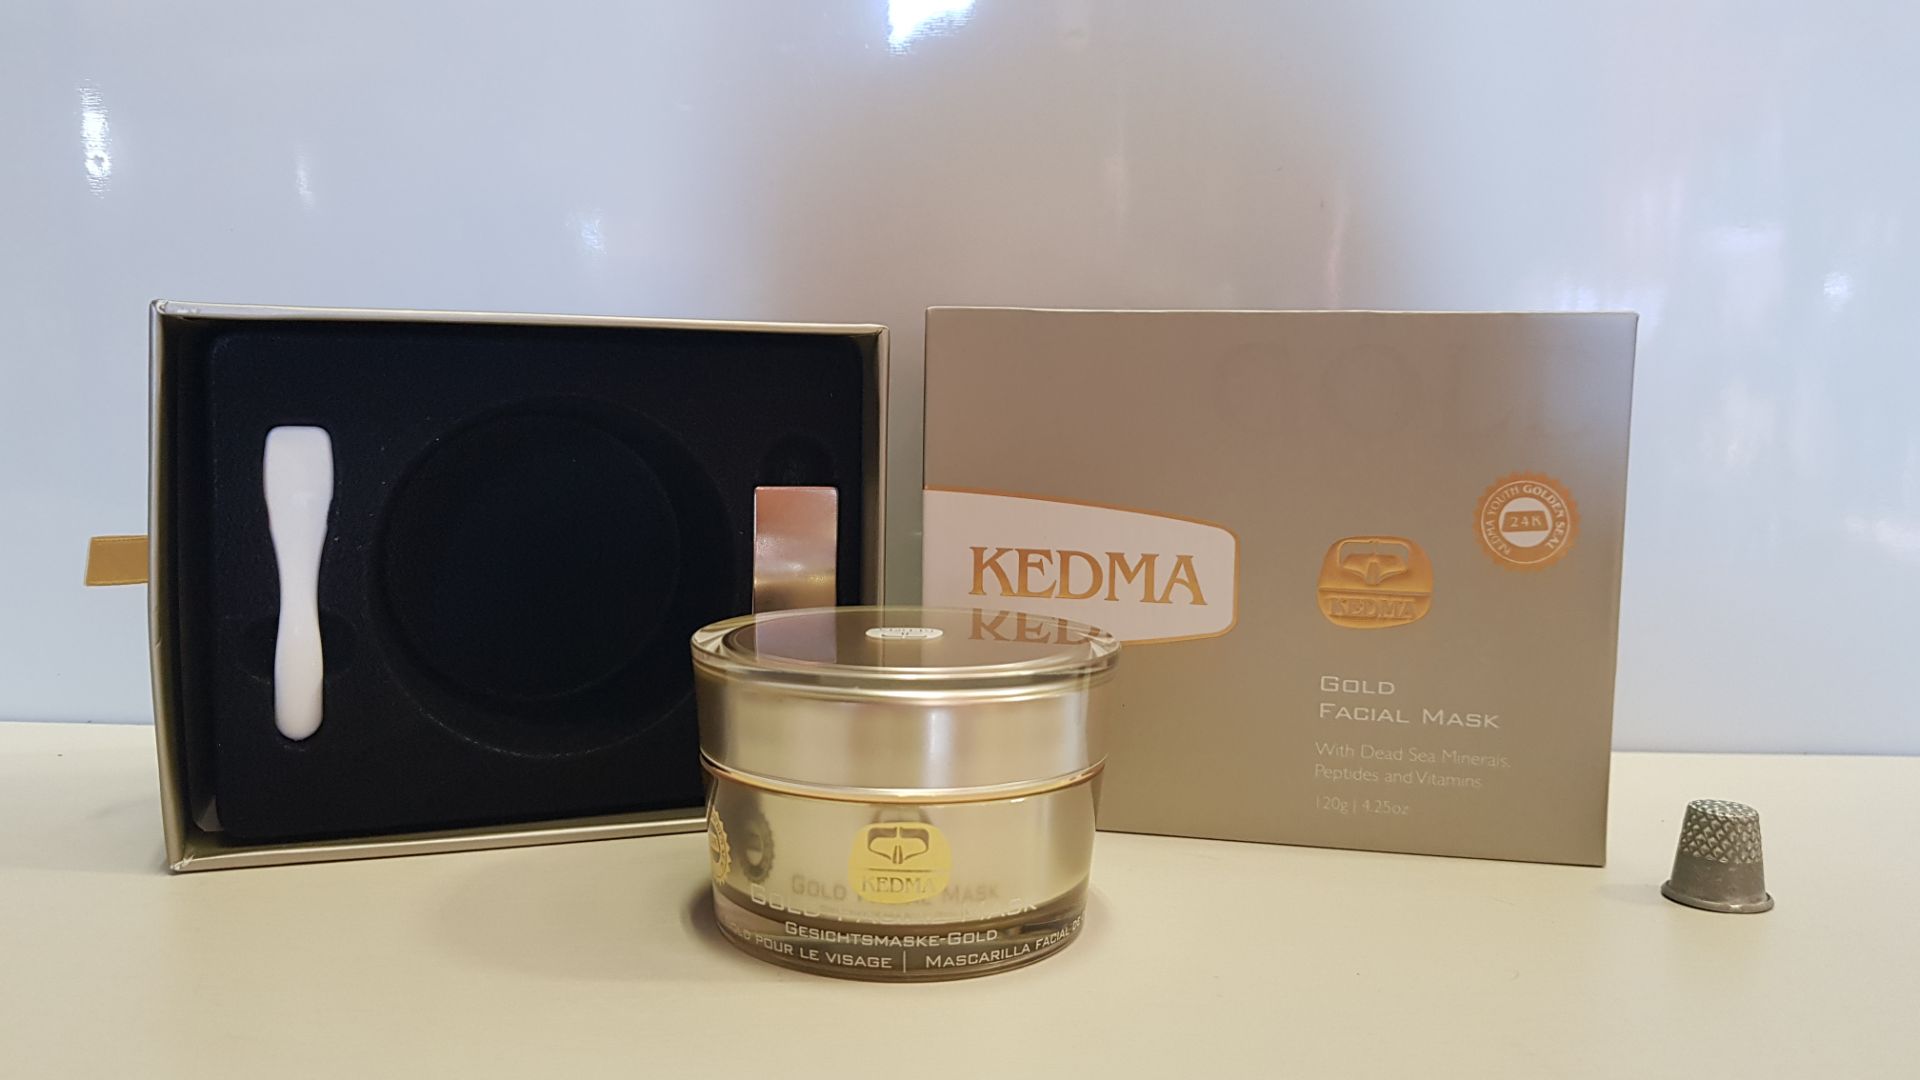 2 X BRAND NEW KEDMA 24K GOLD FACIAL MASK WITH DEAD SEA MINERALS, PEPTIDES AND VITAMINS (120G)